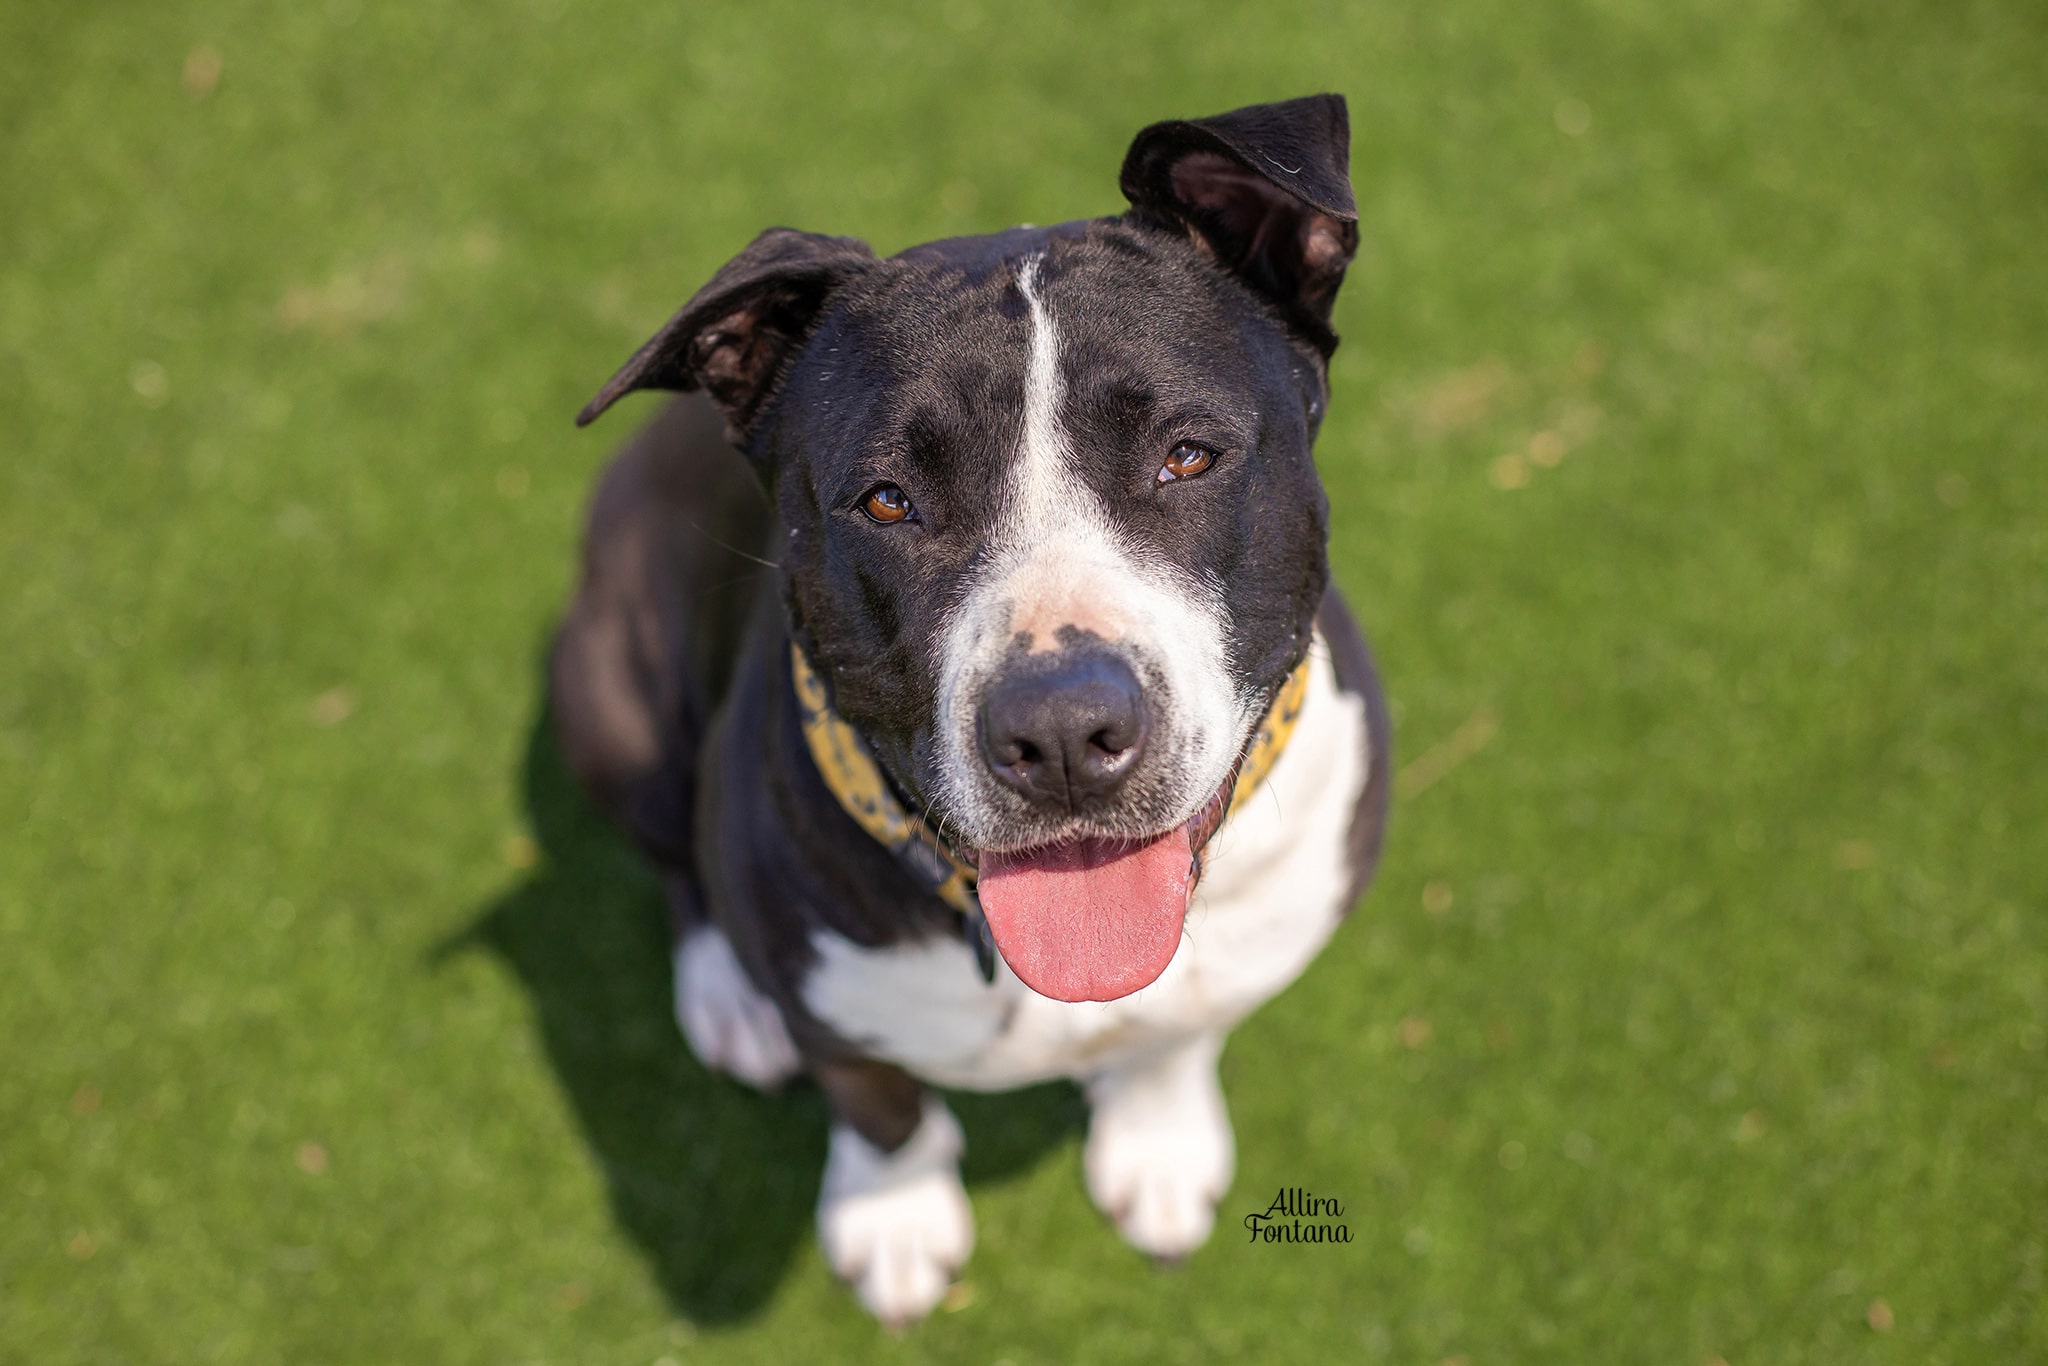 Large Black and White American Staffy type dog